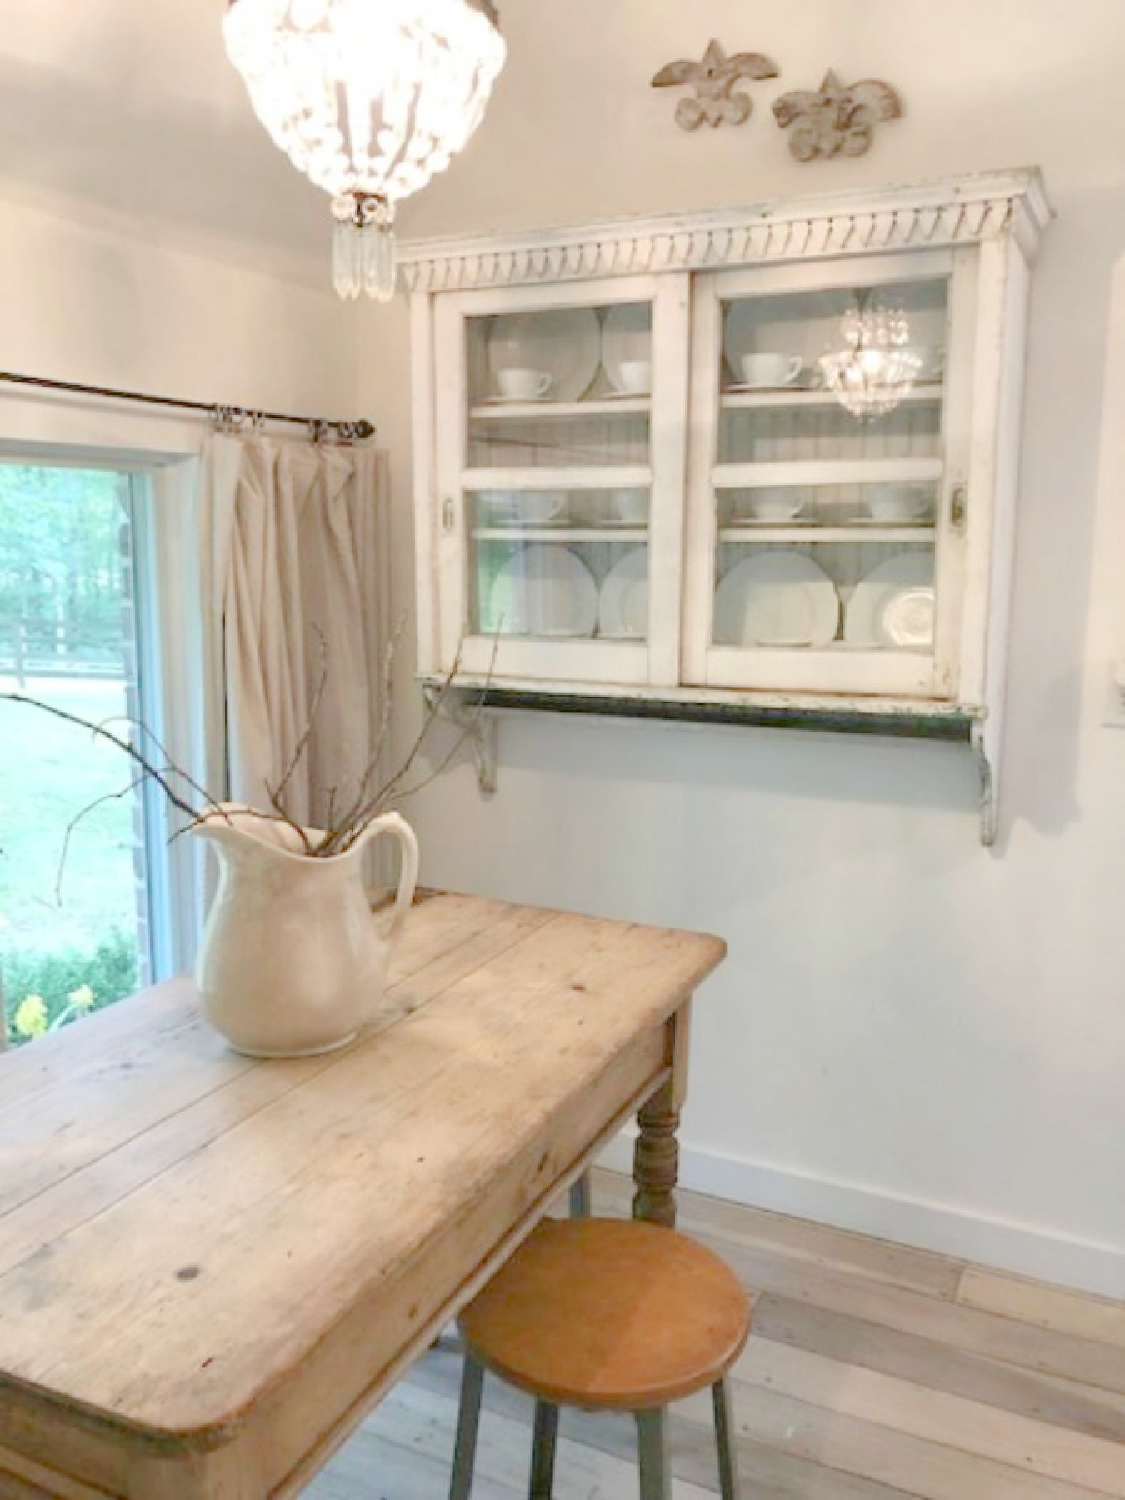 Rustic farm table in kitchen of country cottage in Leiper's Fork, TN known as storybook cottage - Hello Lovely Studio.